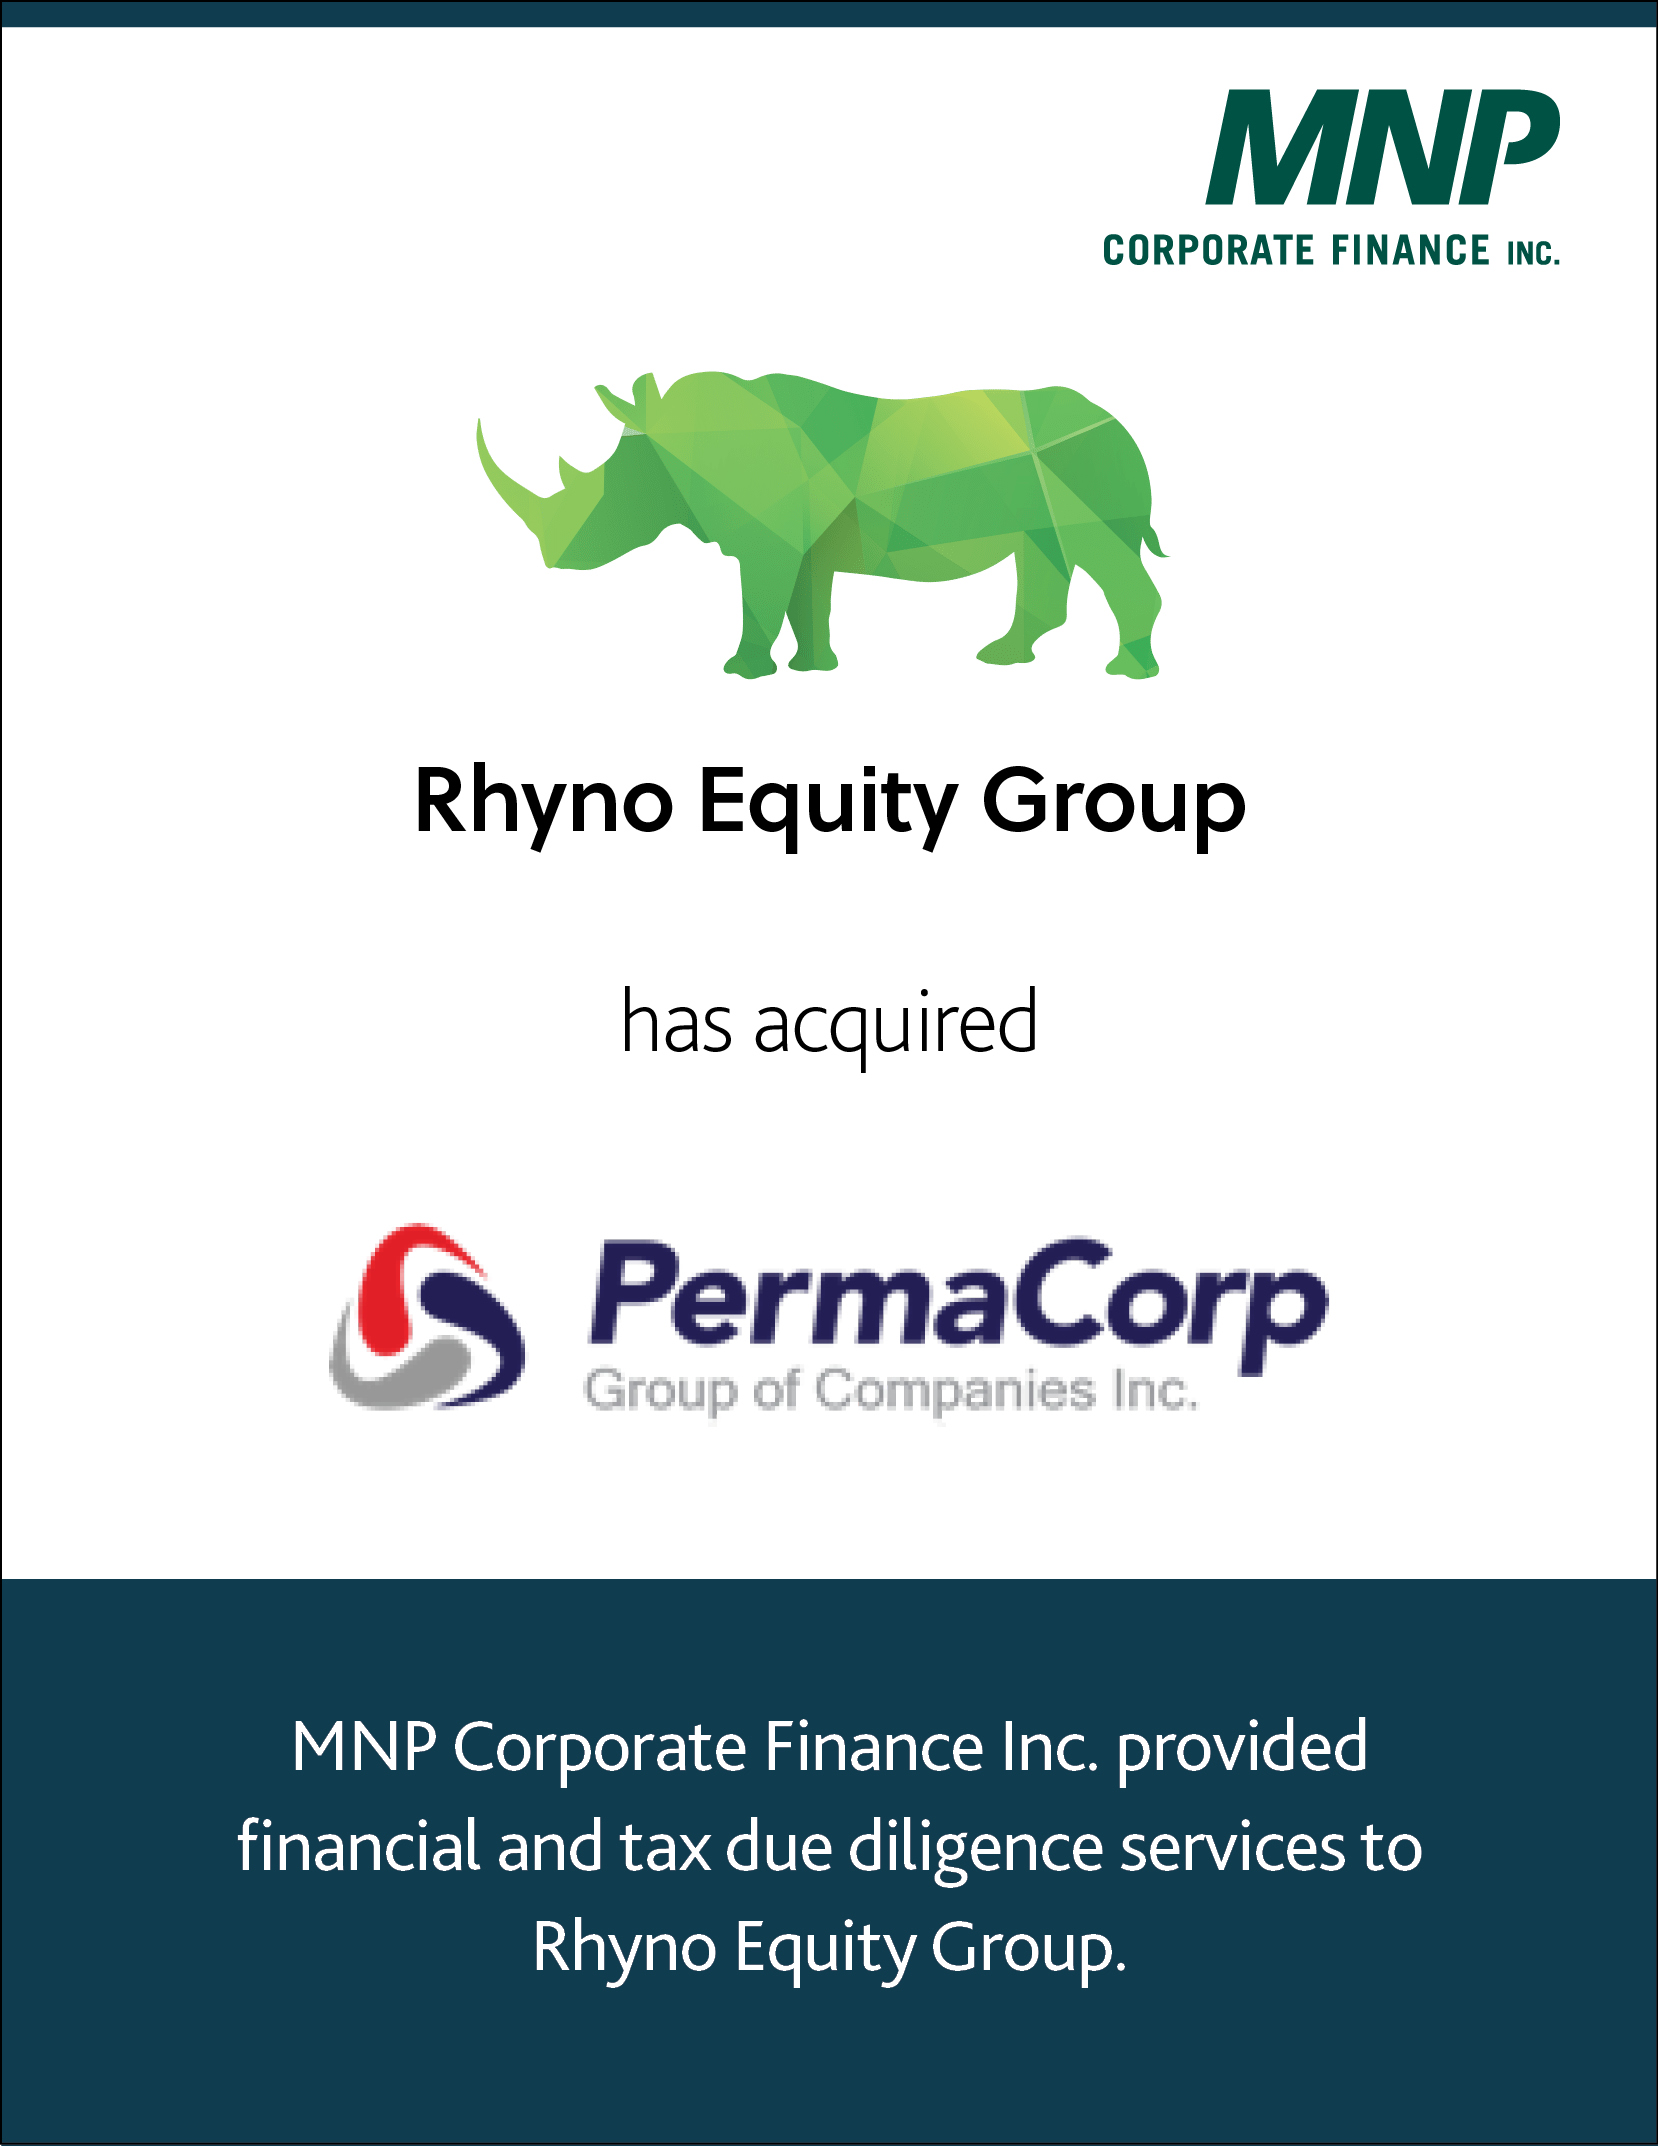 Rhyno Equity Group has acquired PermaCorp Group of Companies